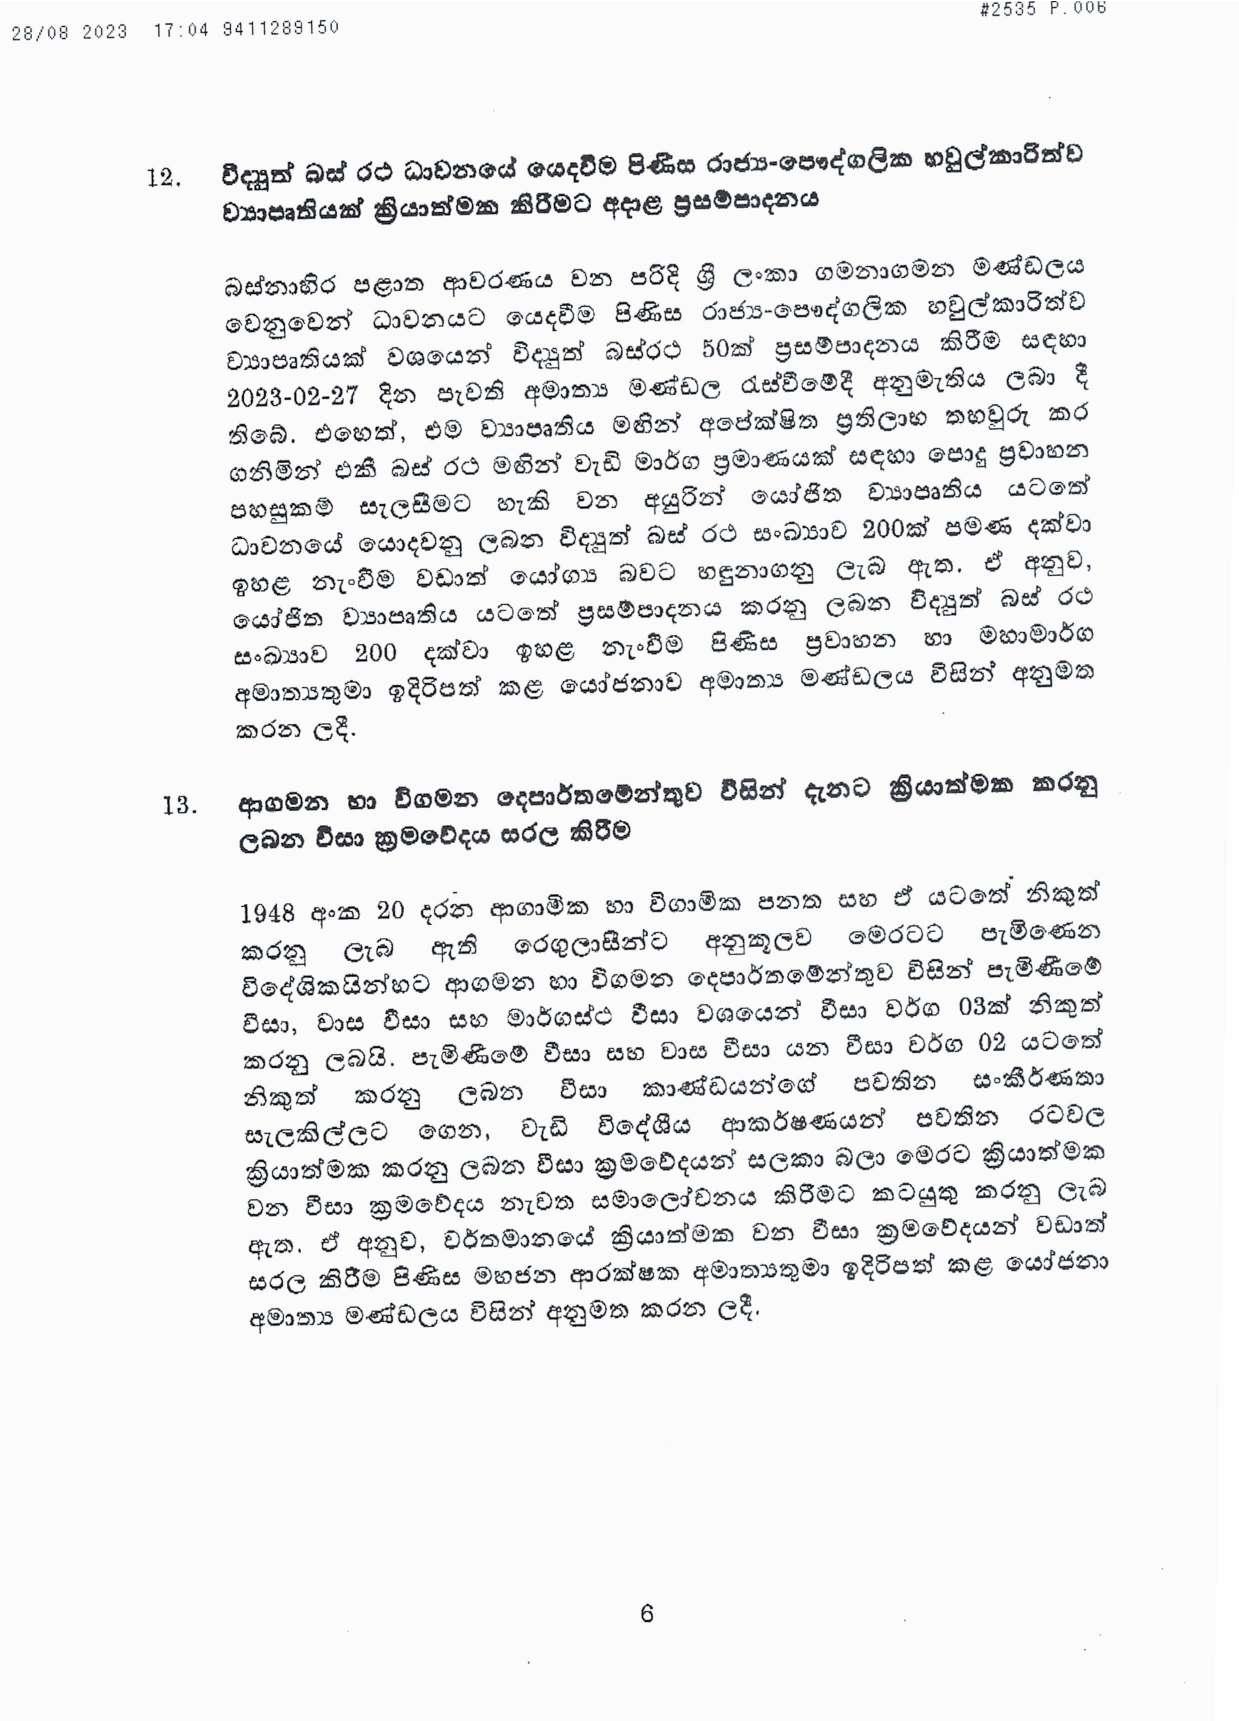 Cabinet Decision on 28.08.2023 page 006